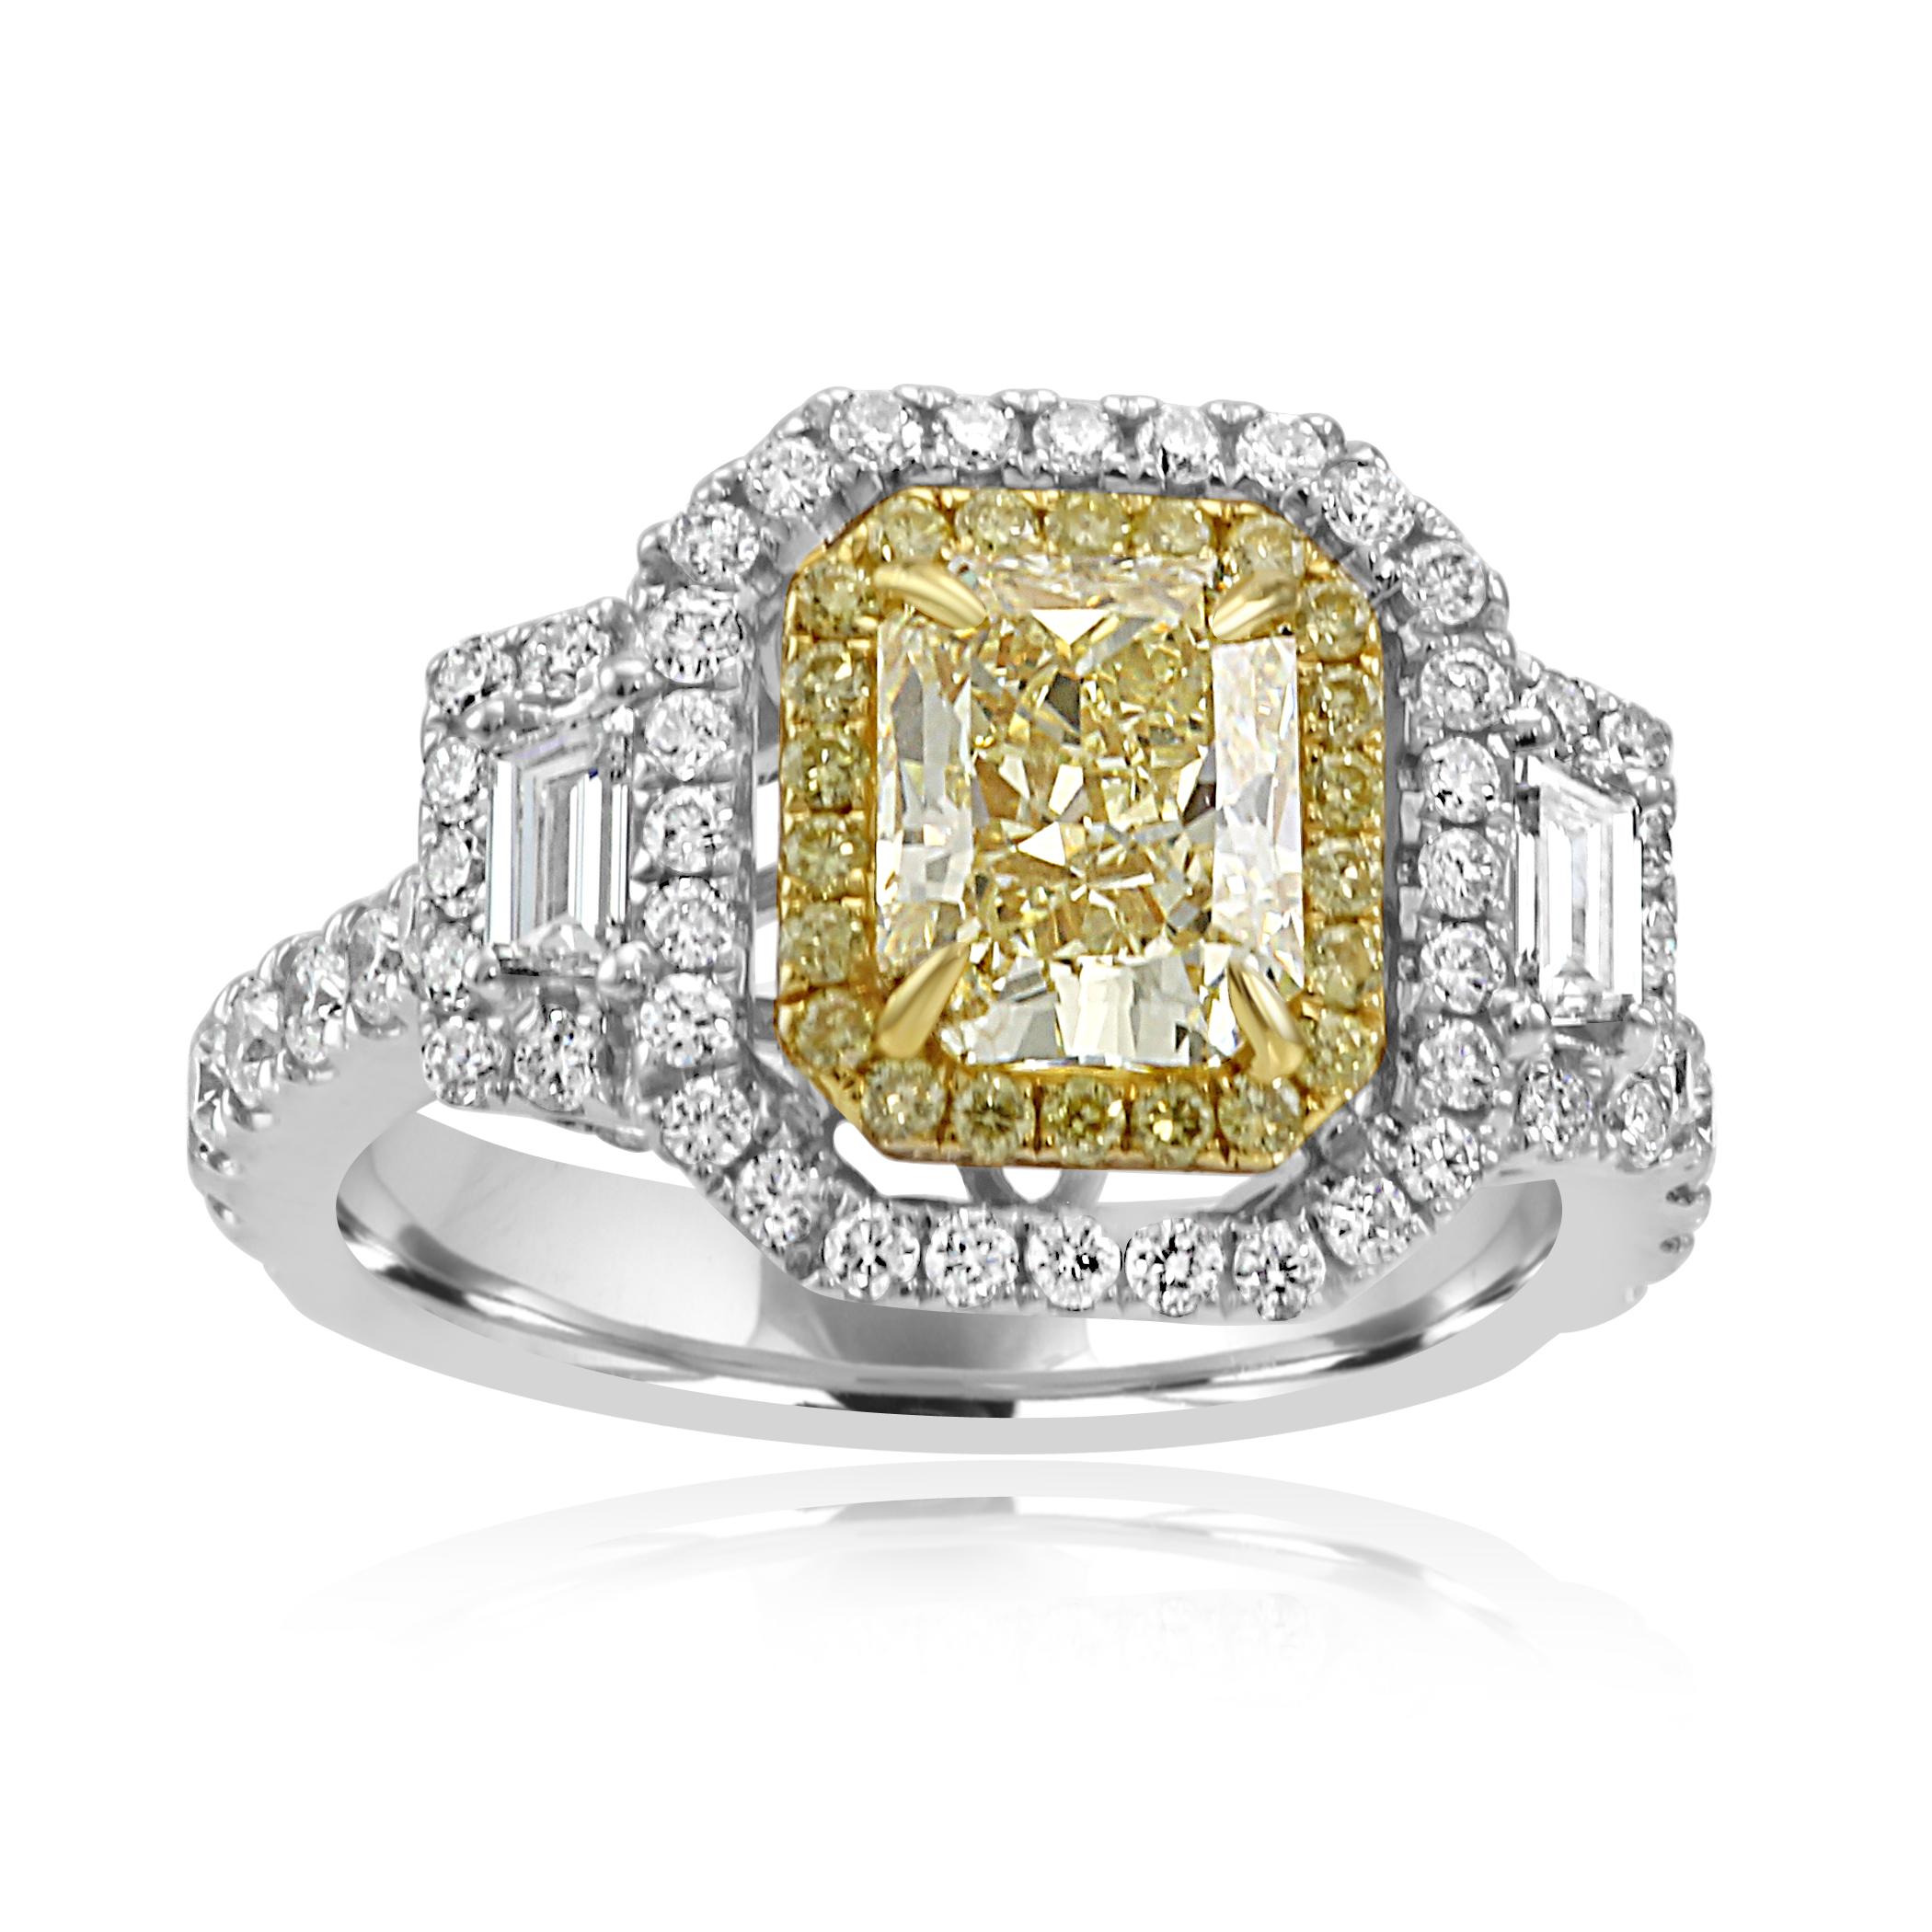 EGL USA Certified Gorgeous Natural Fancy Light Yellow Radiant VS1 Clarity 1.41 Carat Flanked with 2 White G-H Color VS Clarity Trapezoid Diamonds 0.23 Carat Encircled in a Double Halo White G-H Color VS-SI Clarity Round 0.90 Carat and Natural Fancy